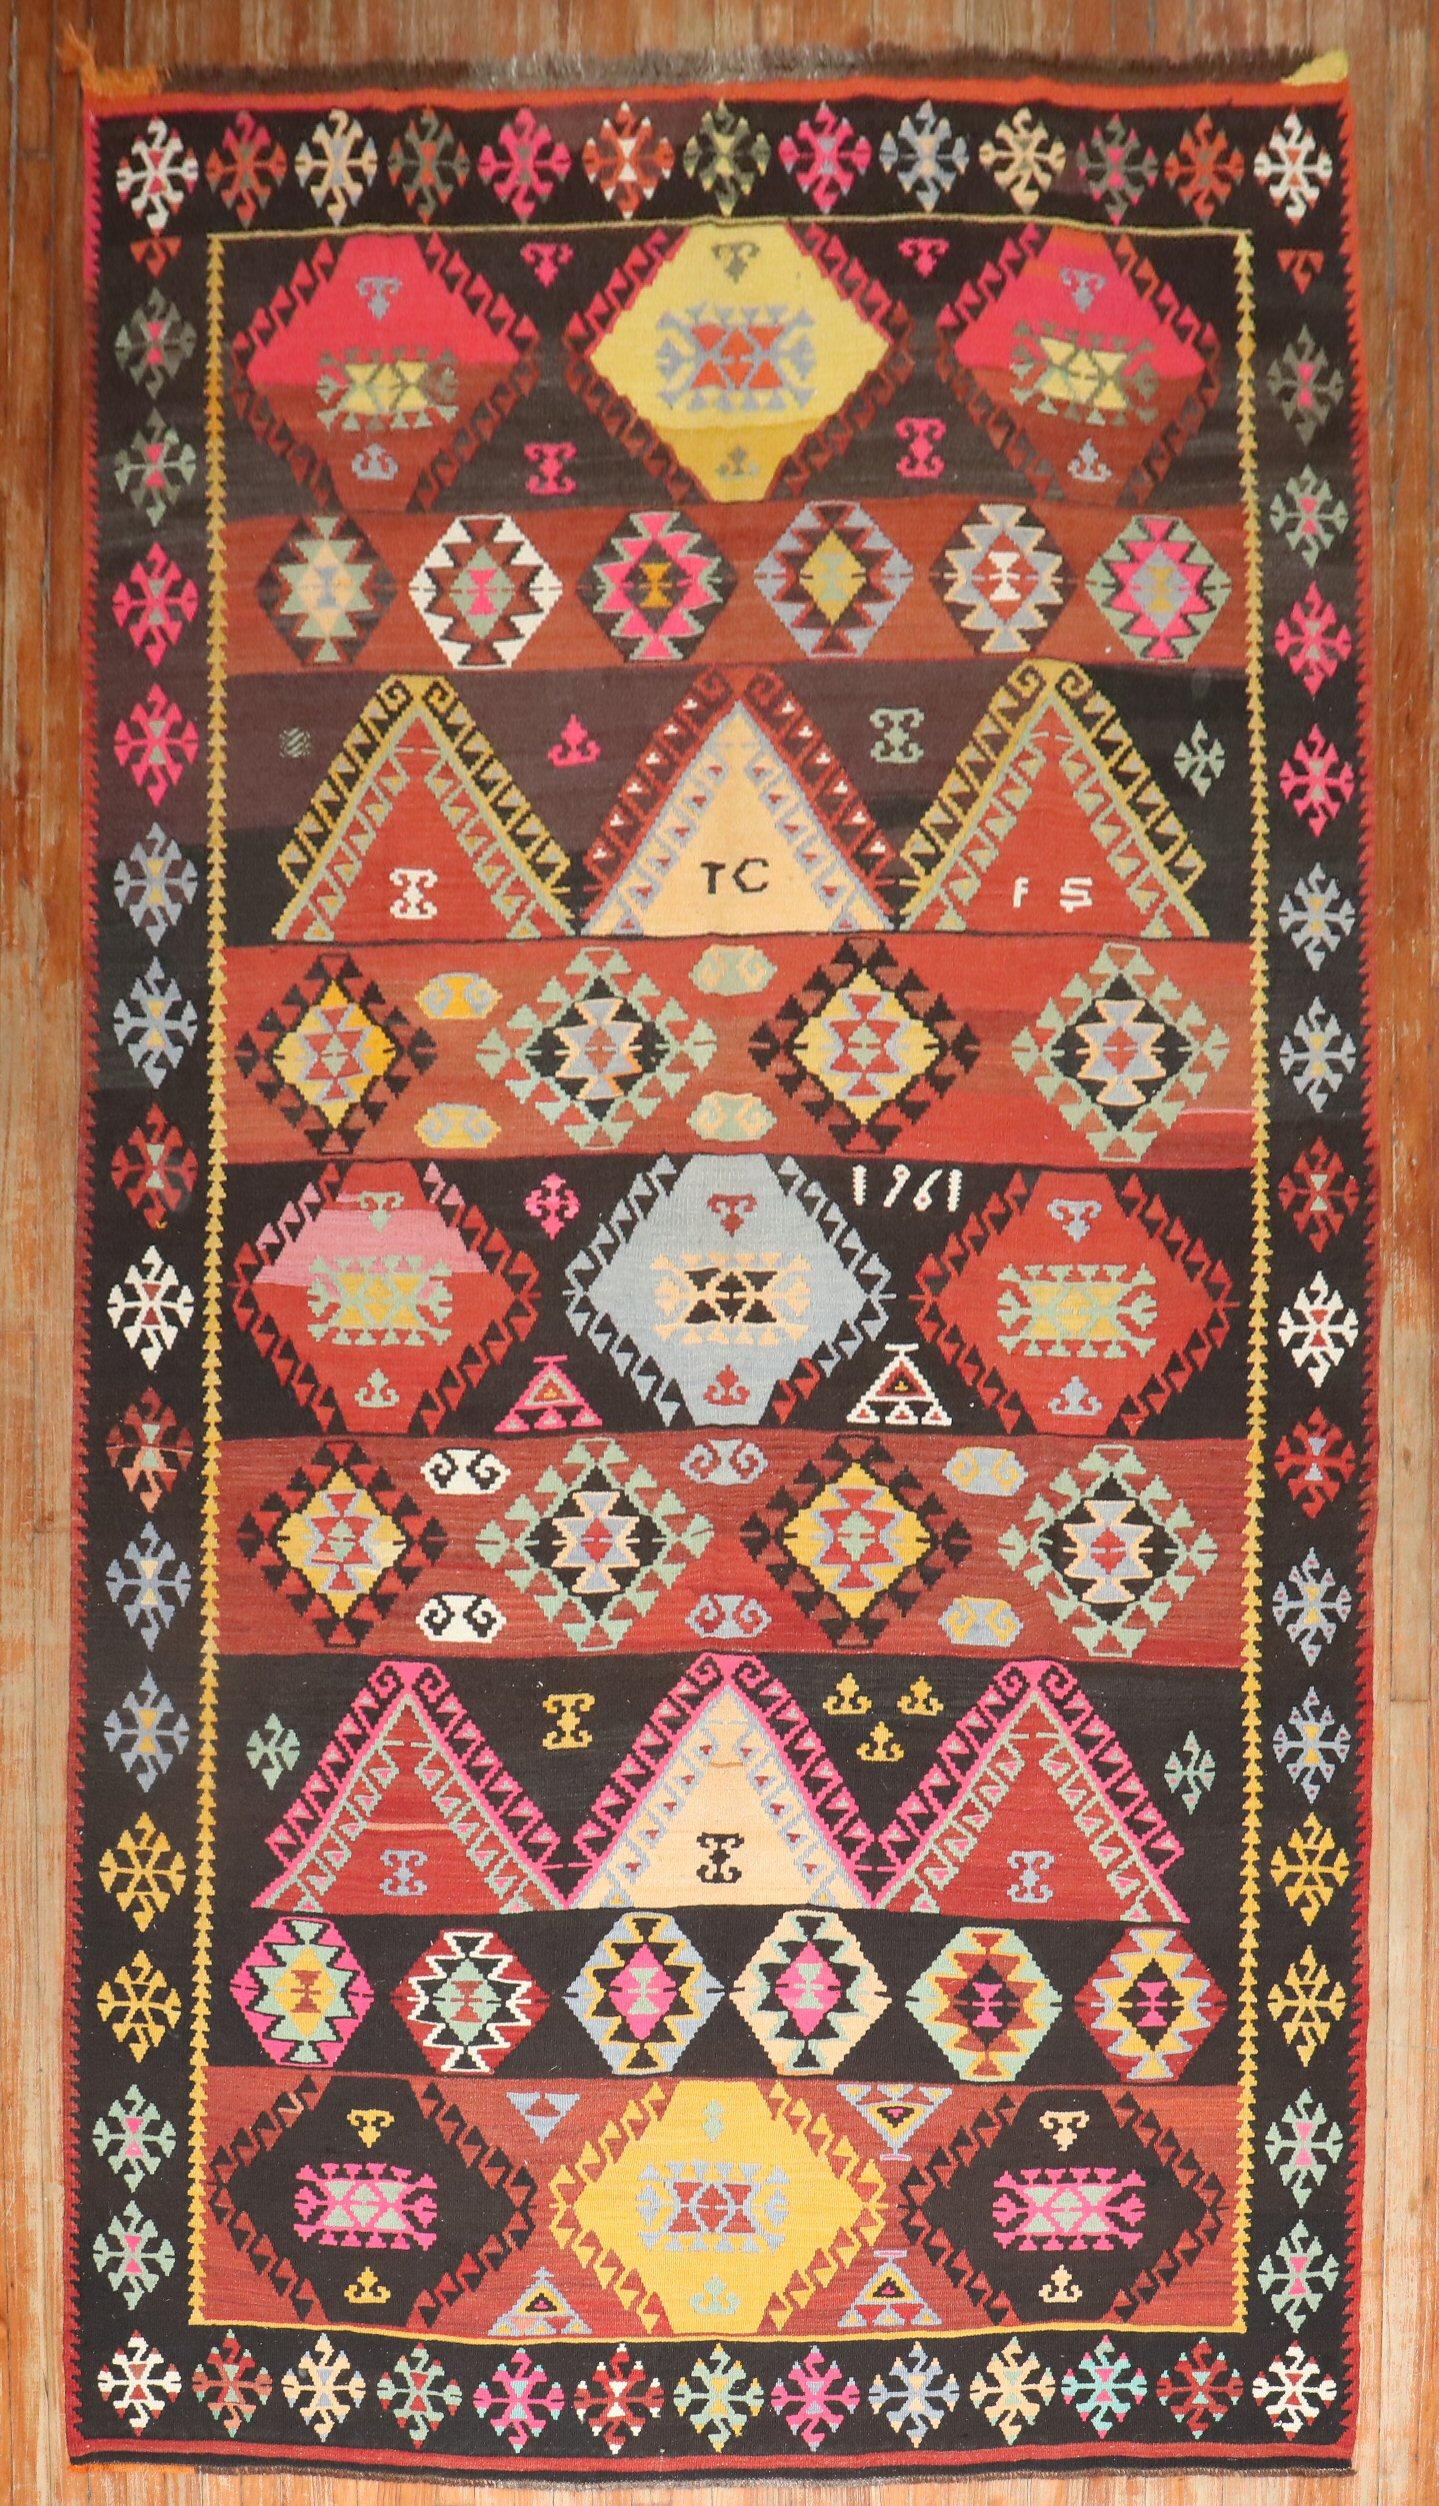 Geometric Turkish Kilim made in a gallery format from the 3rd quarter of the 20th century

Measures: 6'2'' x 11'2''

Kilims, primarily refer to a type of flat-woven rug that was produced without knotted pile.
Since this is one of the oldest methods